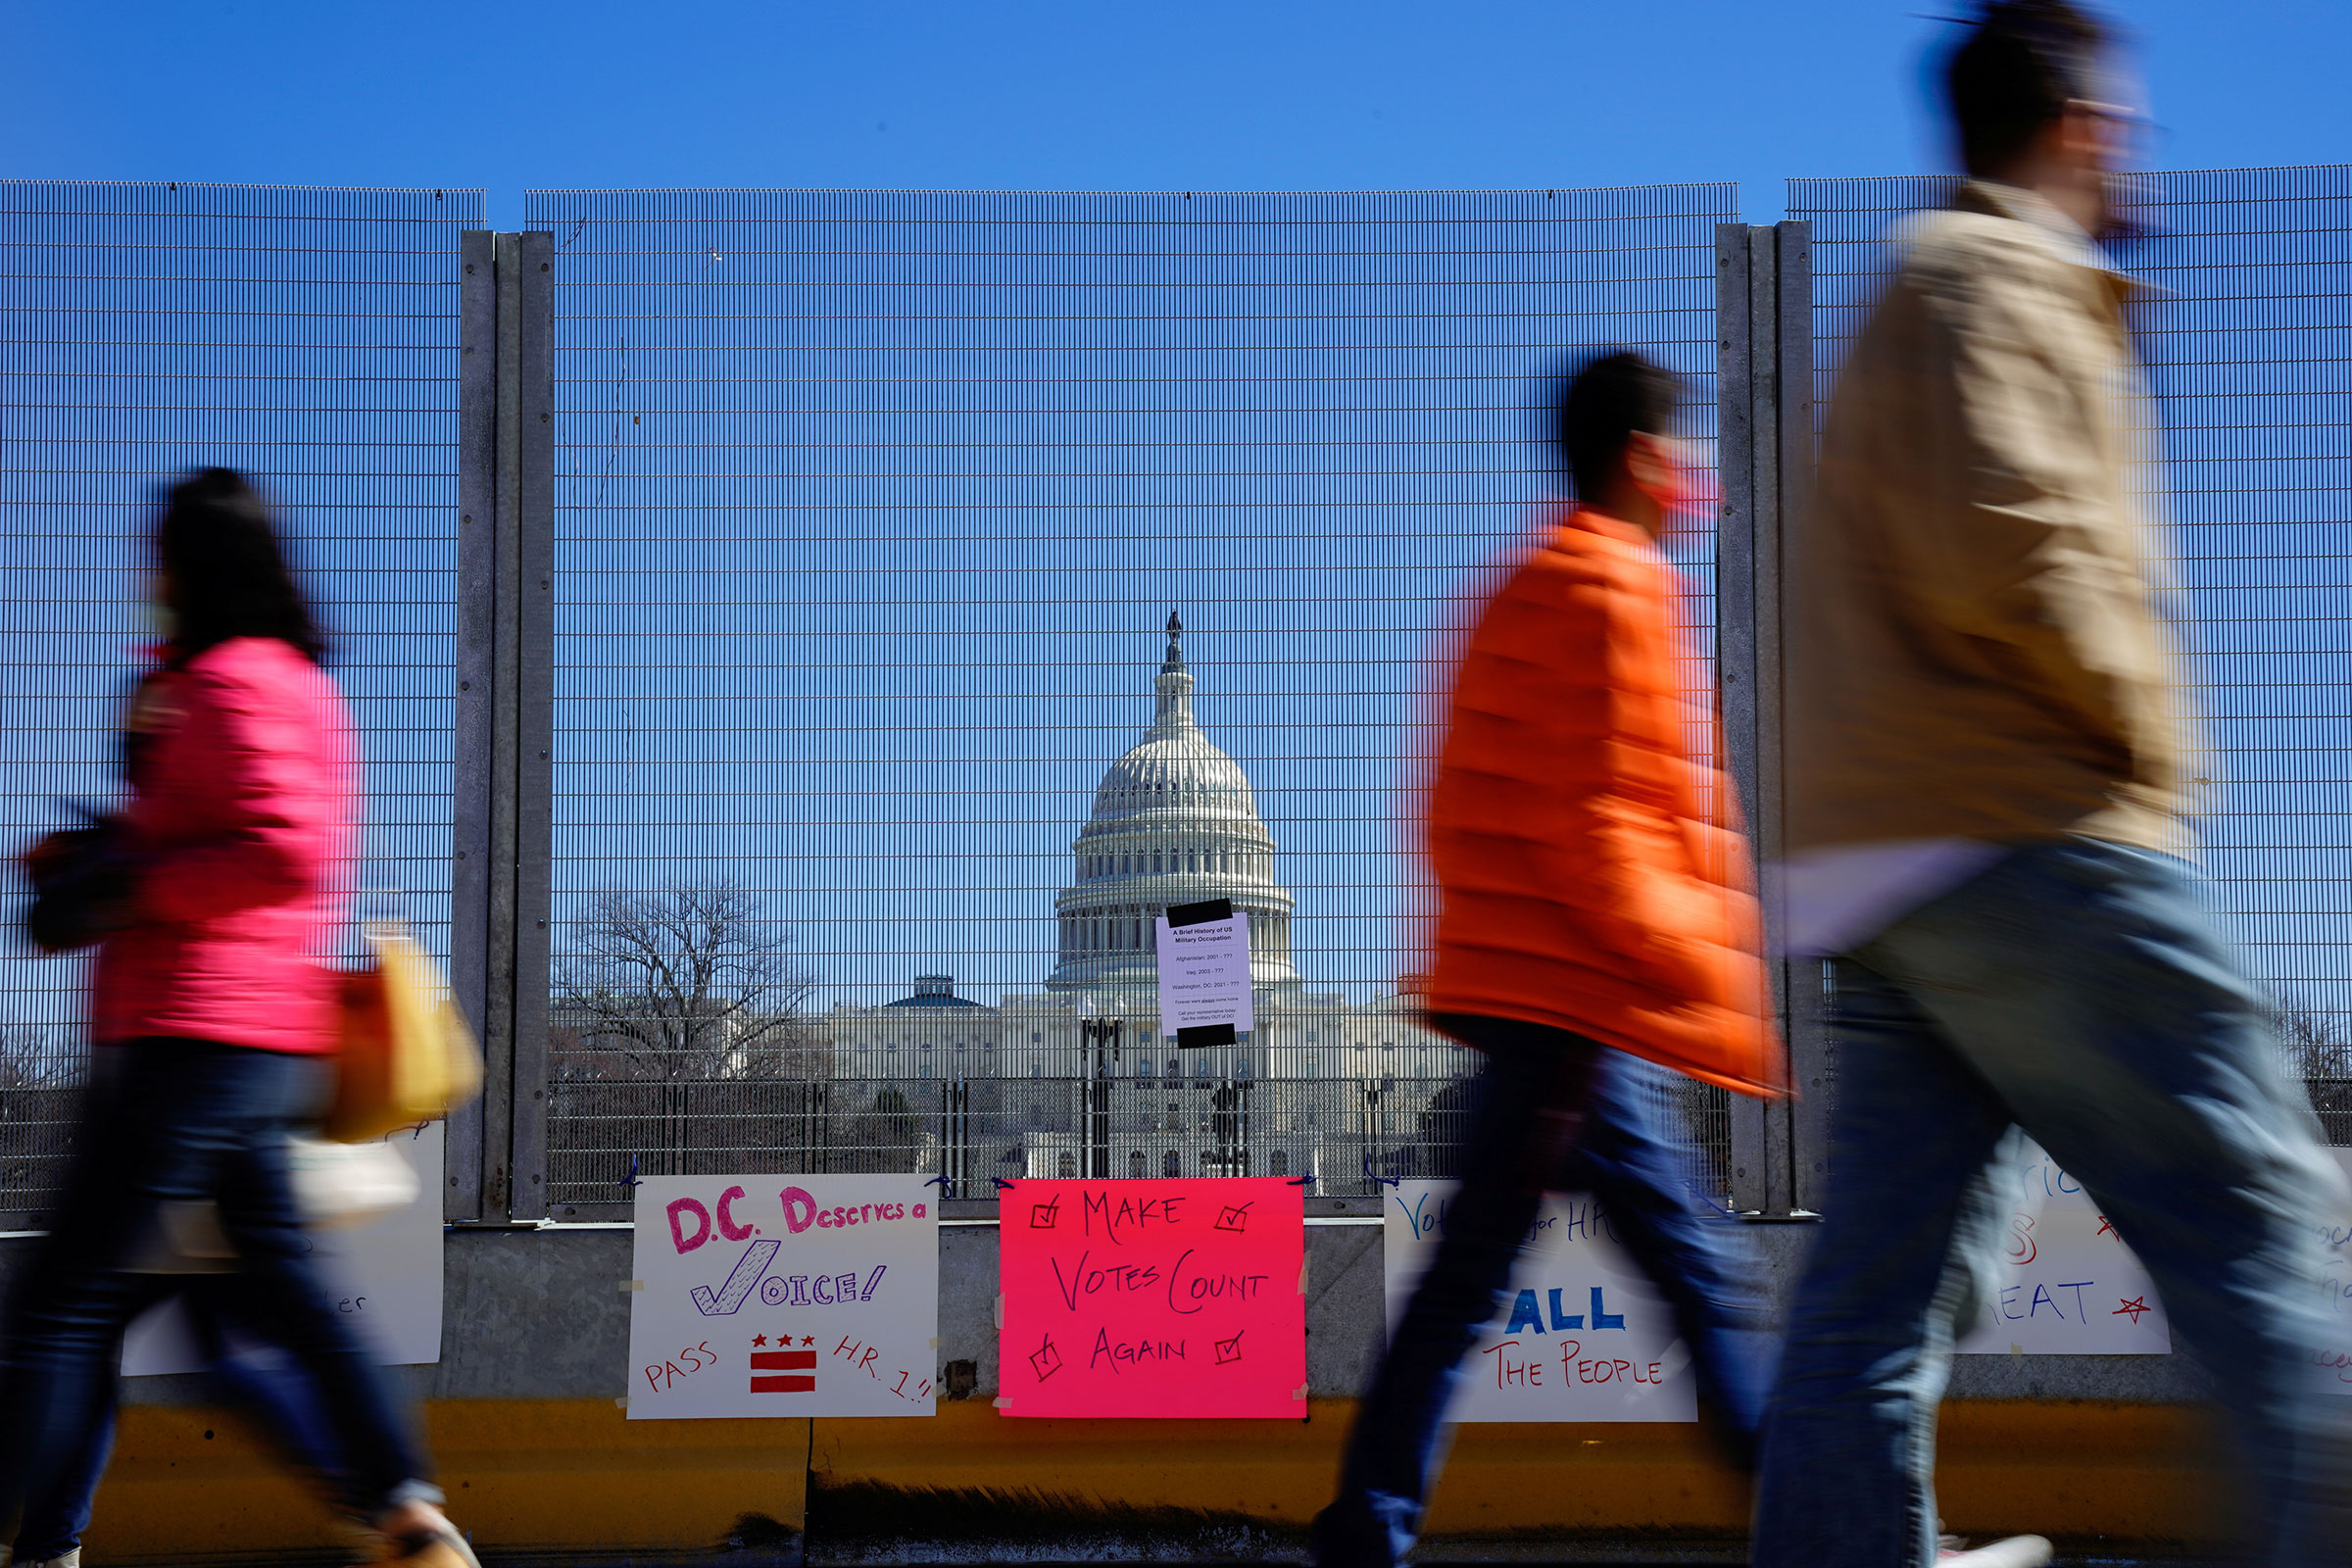 People walk past signs hung on a security fence in support of expanded voting rights near the Capitol in Washington, on March 7, 2021. (Erin Scott—Reuters)